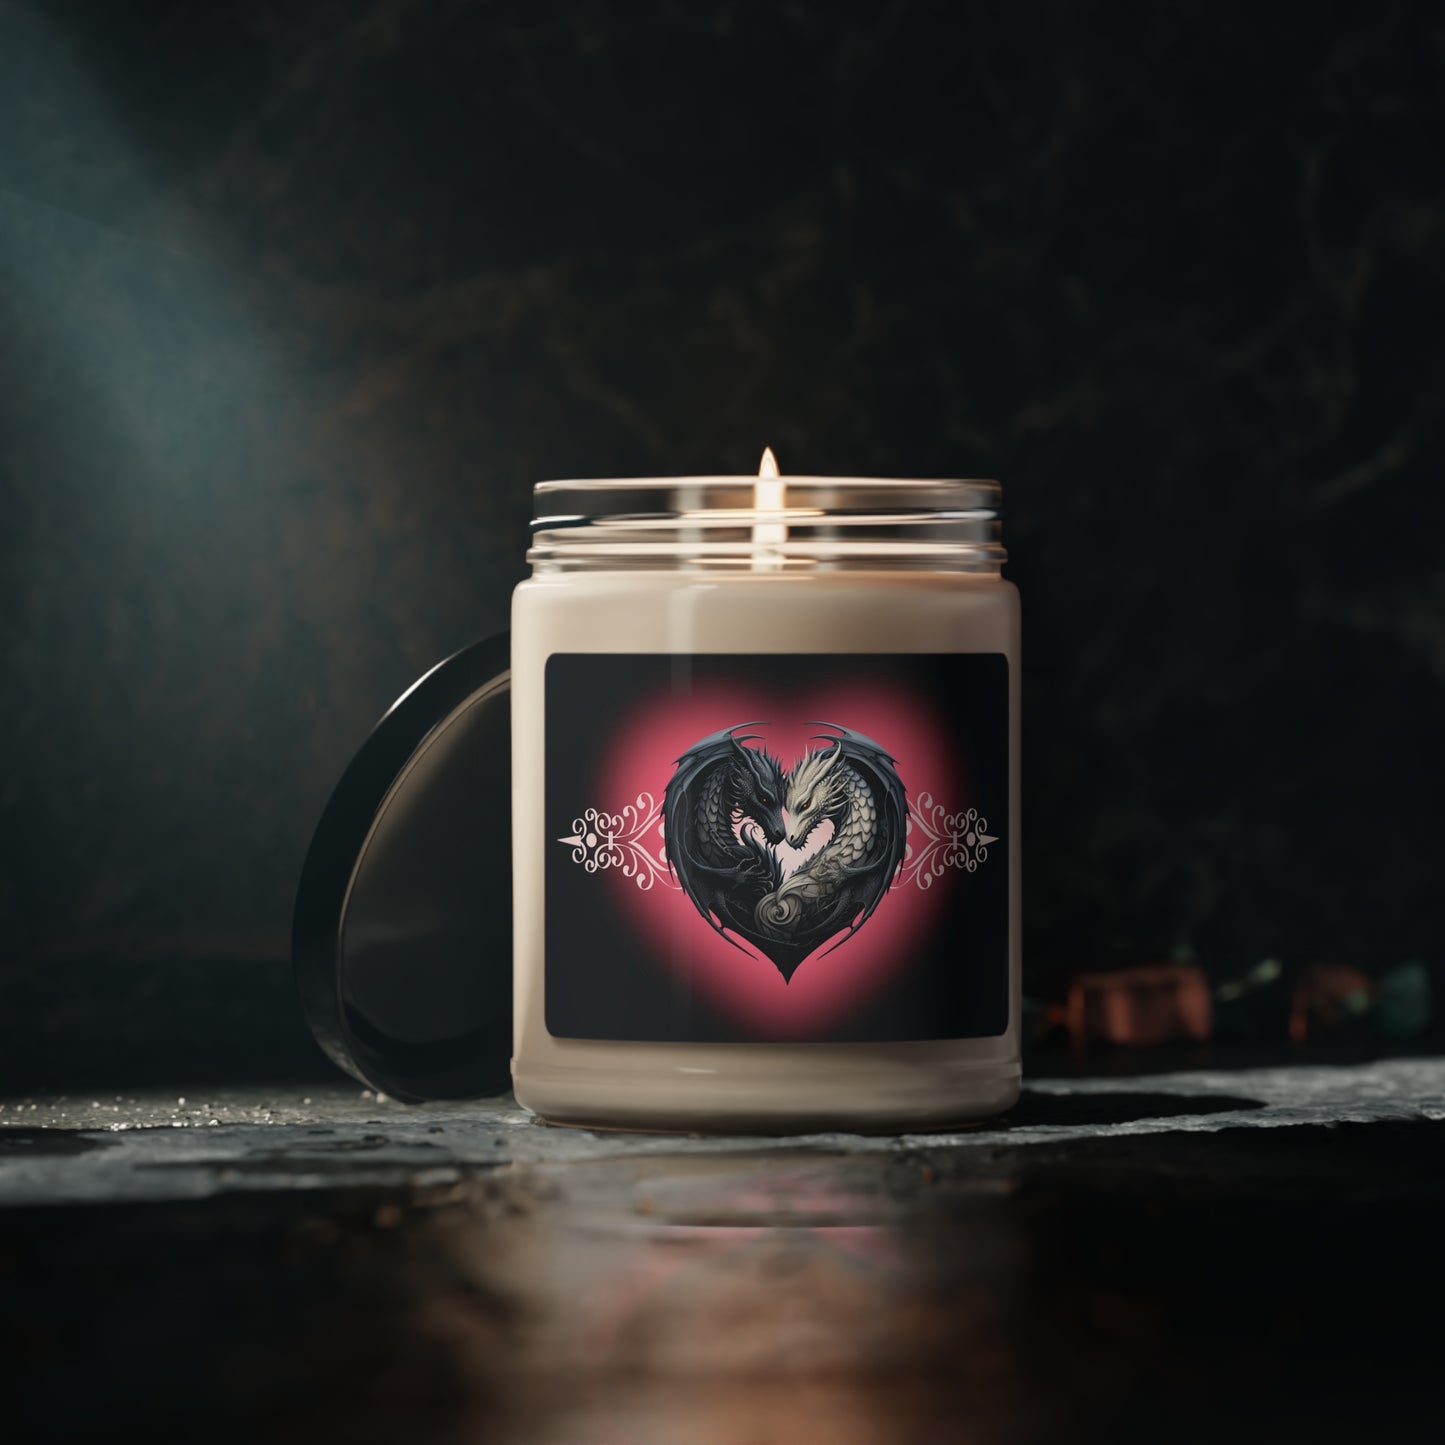 Dragon Love White Heart Scented Soy Candle, 9oz